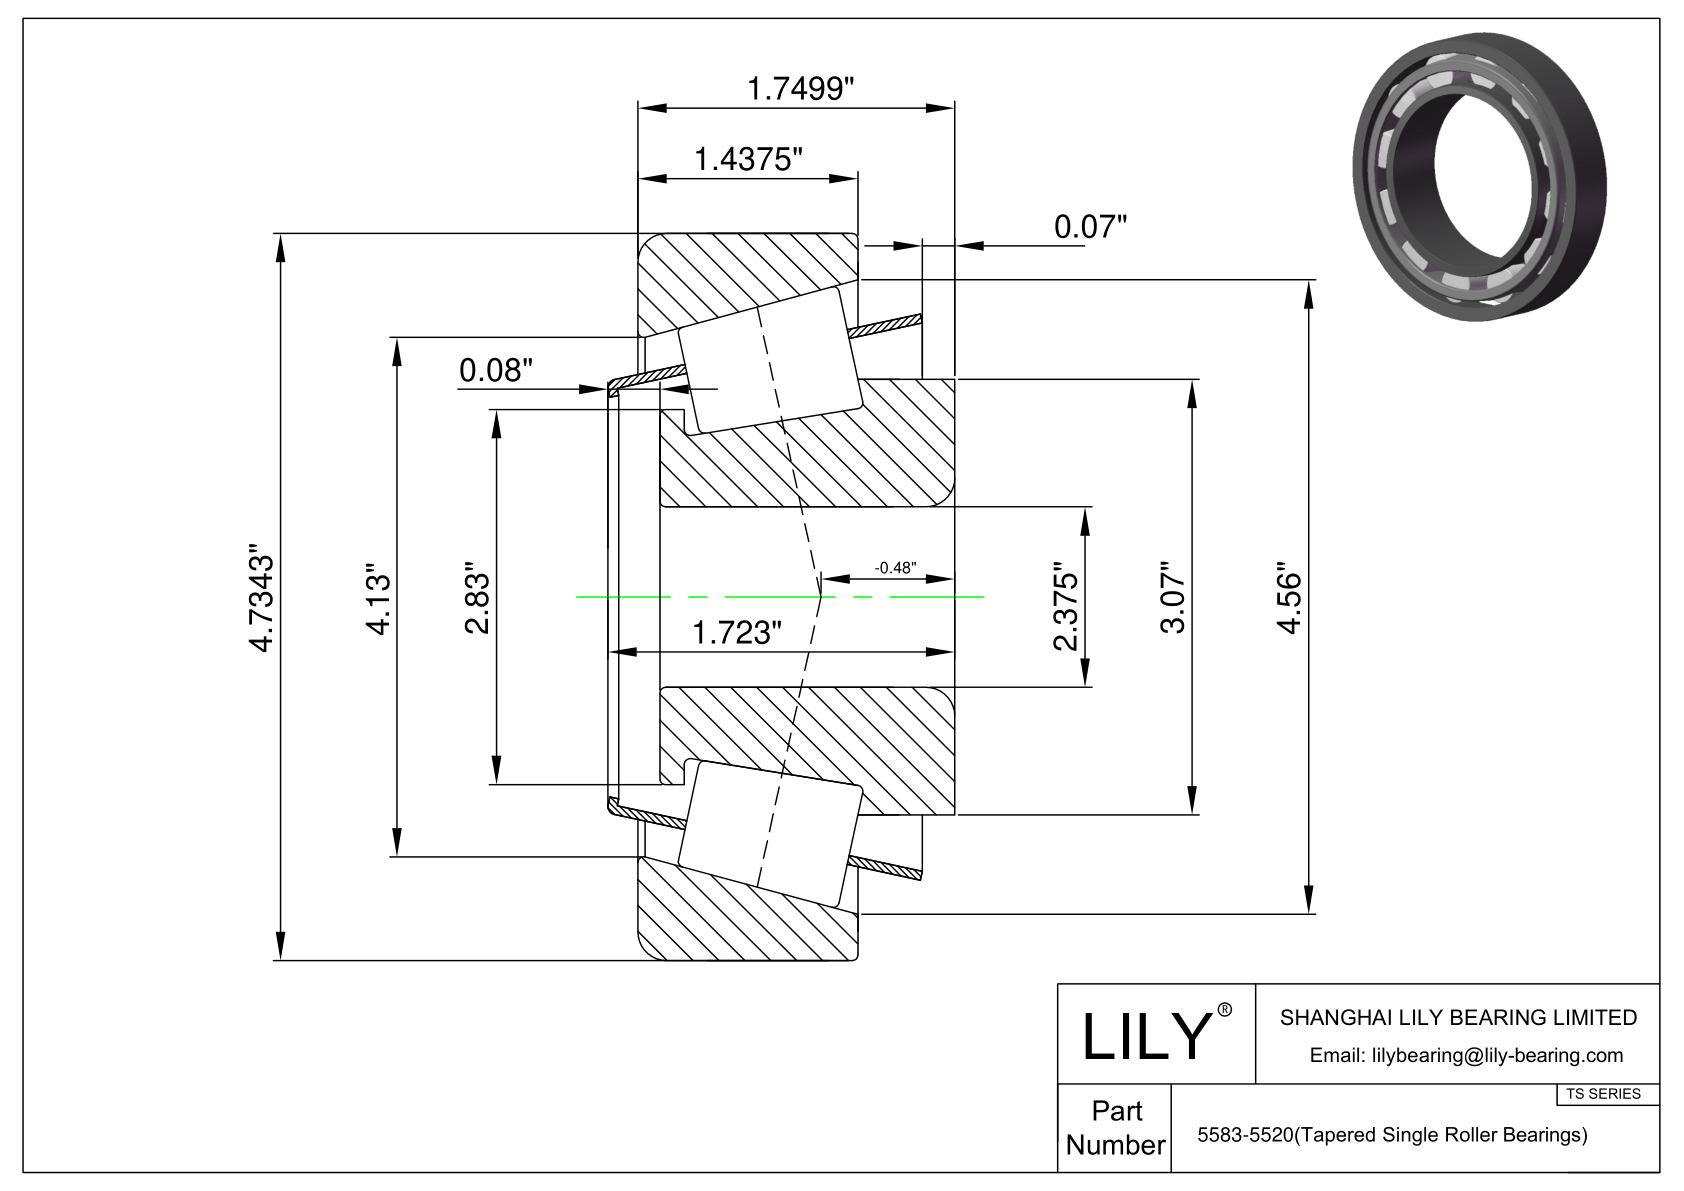 5583-5520 TS (Tapered Single Roller Bearings) (Imperial) cad drawing